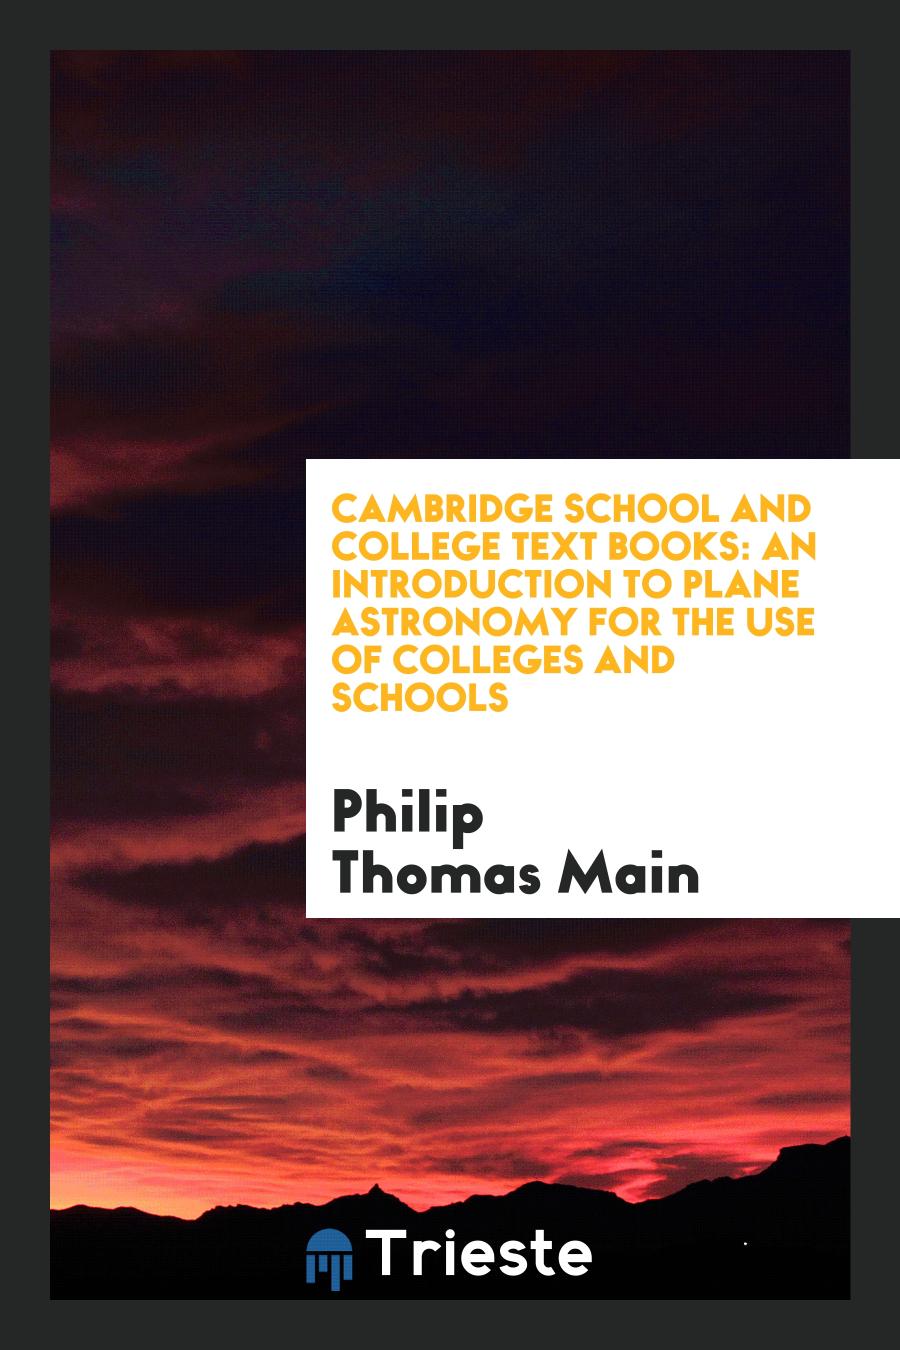 Cambridge School and College Text Books: An Introduction to Plane Astronomy for the Use of Colleges and Schools